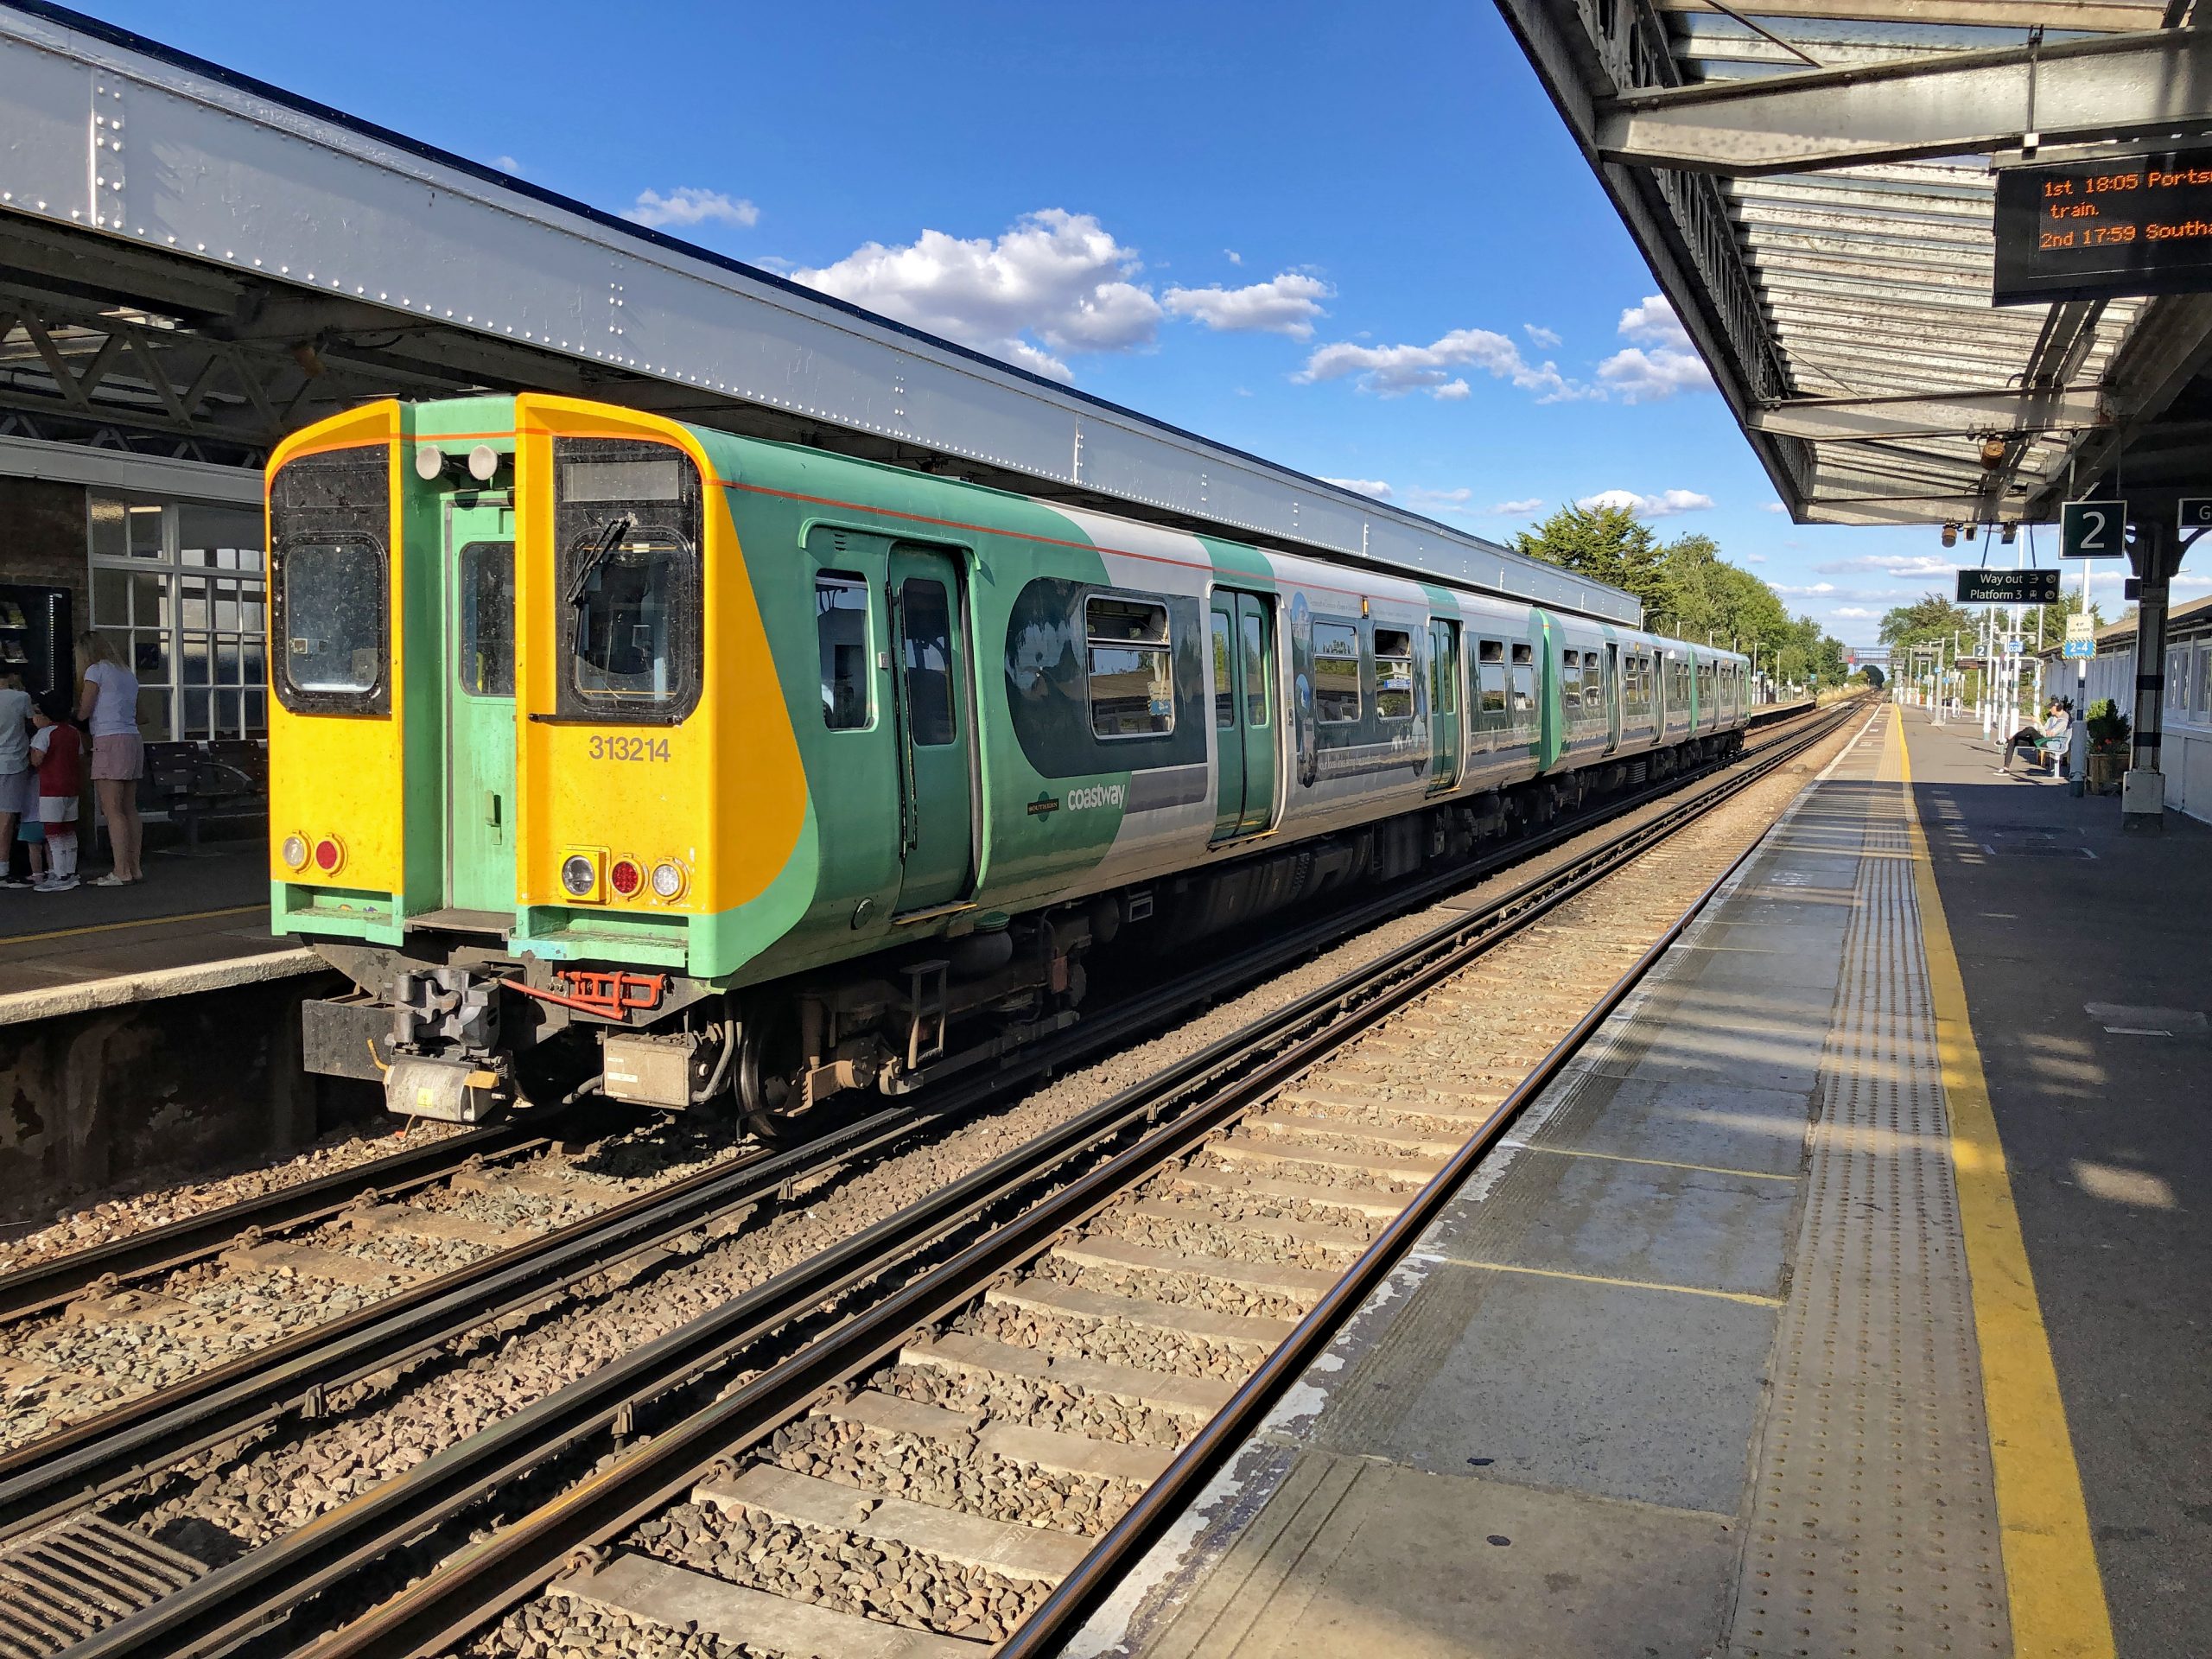 313 214 at Barnham on the late running 16:57 Portsmouth & Southsea to Littlehampton service. 05 August 2022.